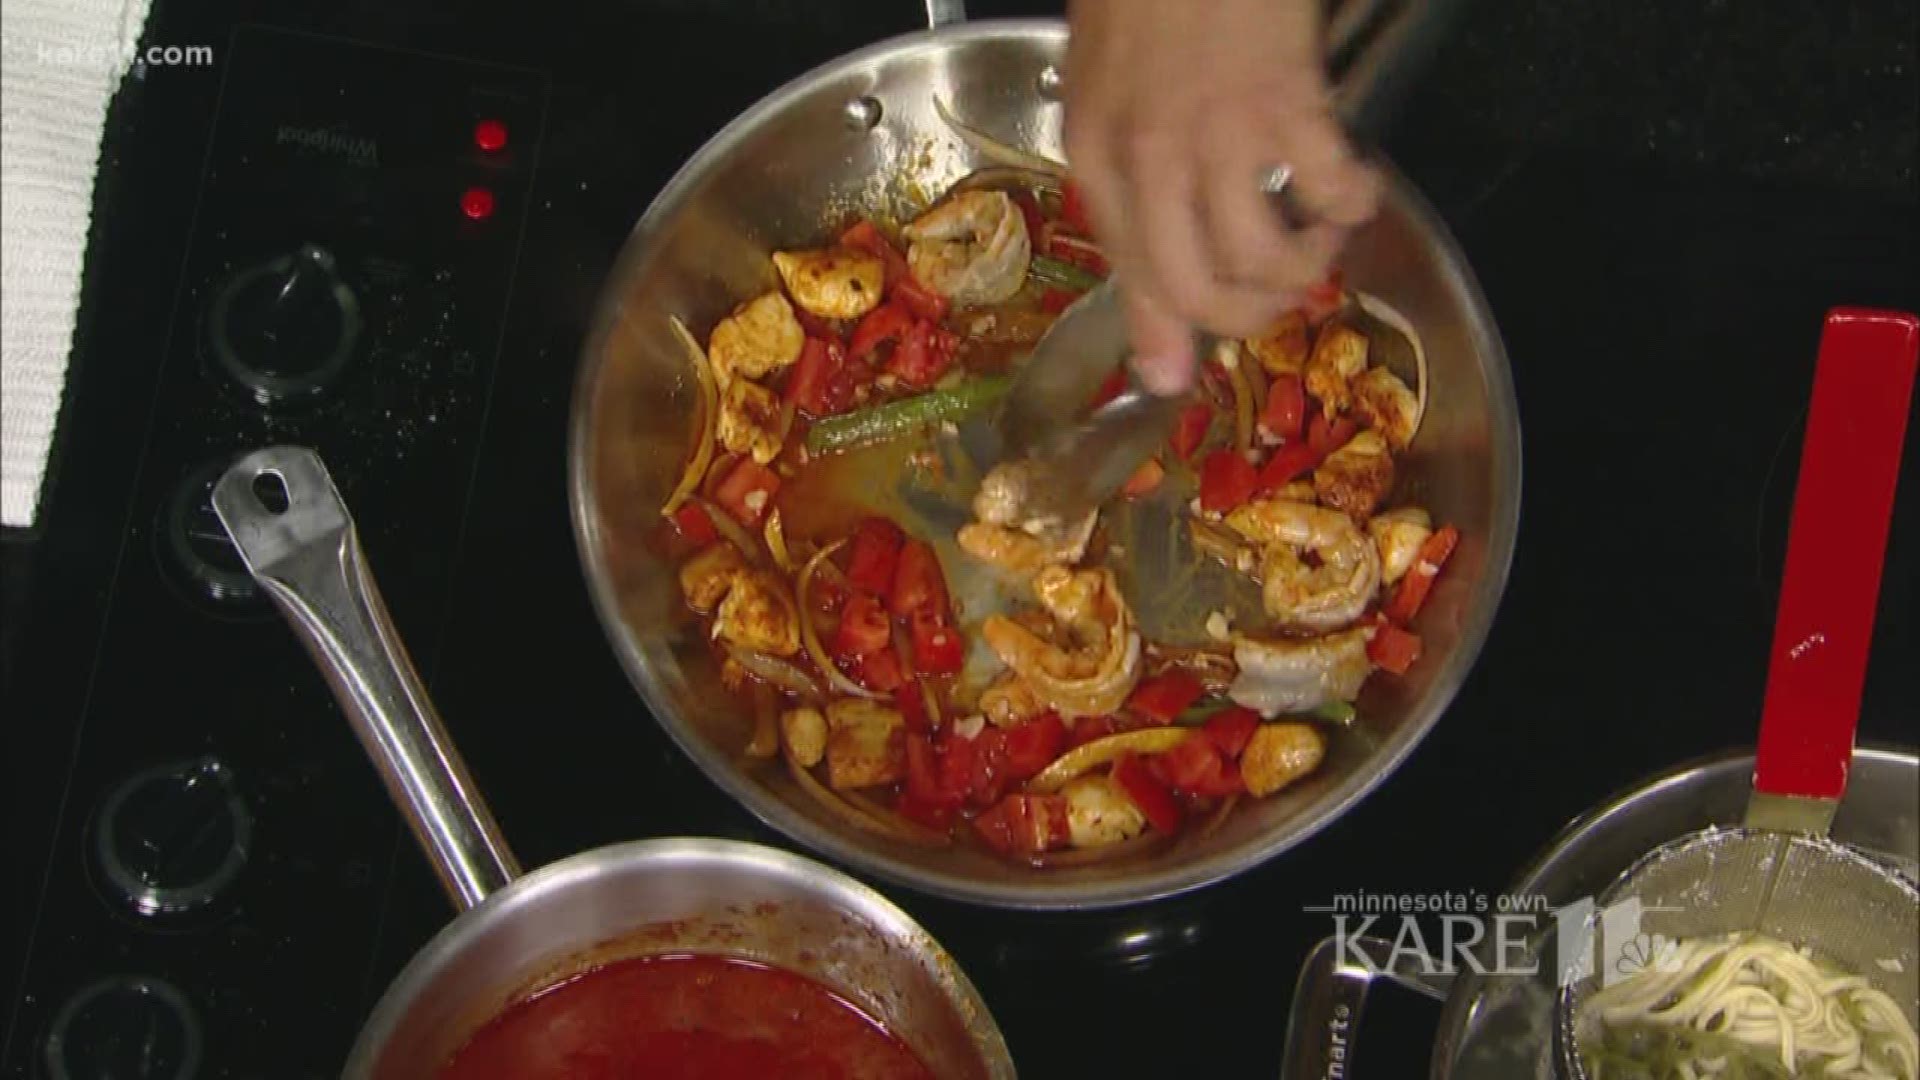 The Cheesecake Factory is opening a location at Ridgedale Center in Minnetonka on Tuesday, Oct. 17 at 11 a.m. Chef Brandon Hefty joined us on KARE 11 News at 4 to discuss the new restaurant and prepare The Cheesecake Factory's signature Cajun Jambalaya Pa